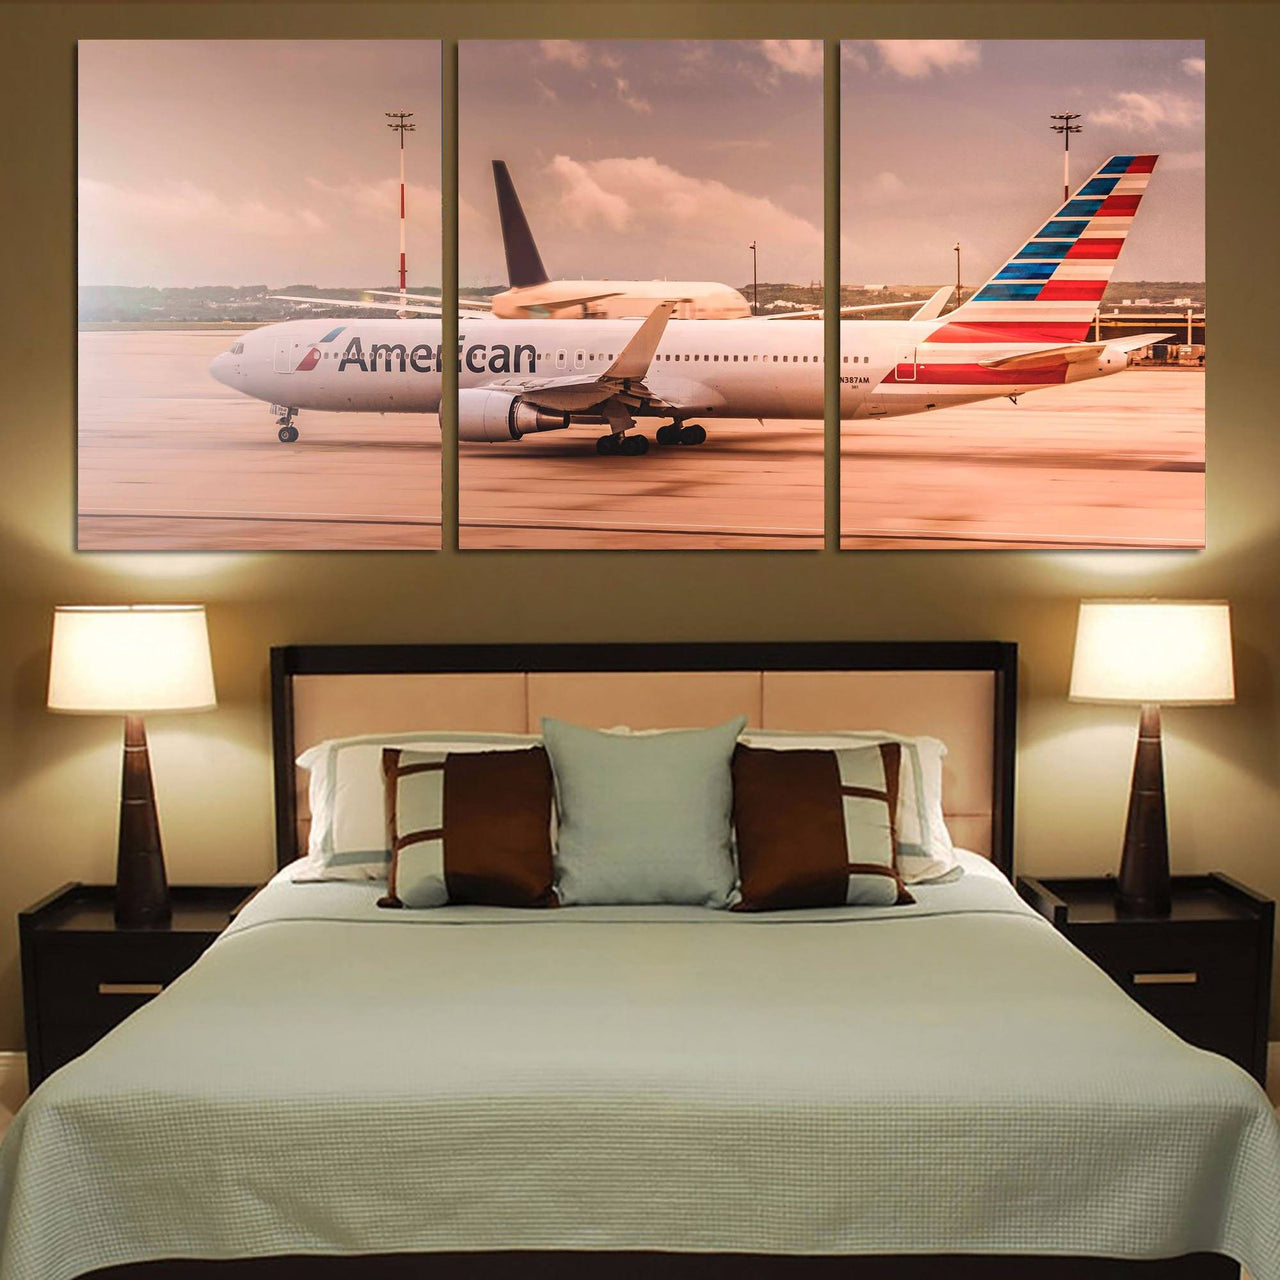 American Airlines Boeing 767 Printed Canvas Posters (3 Pieces) Aviation Shop 